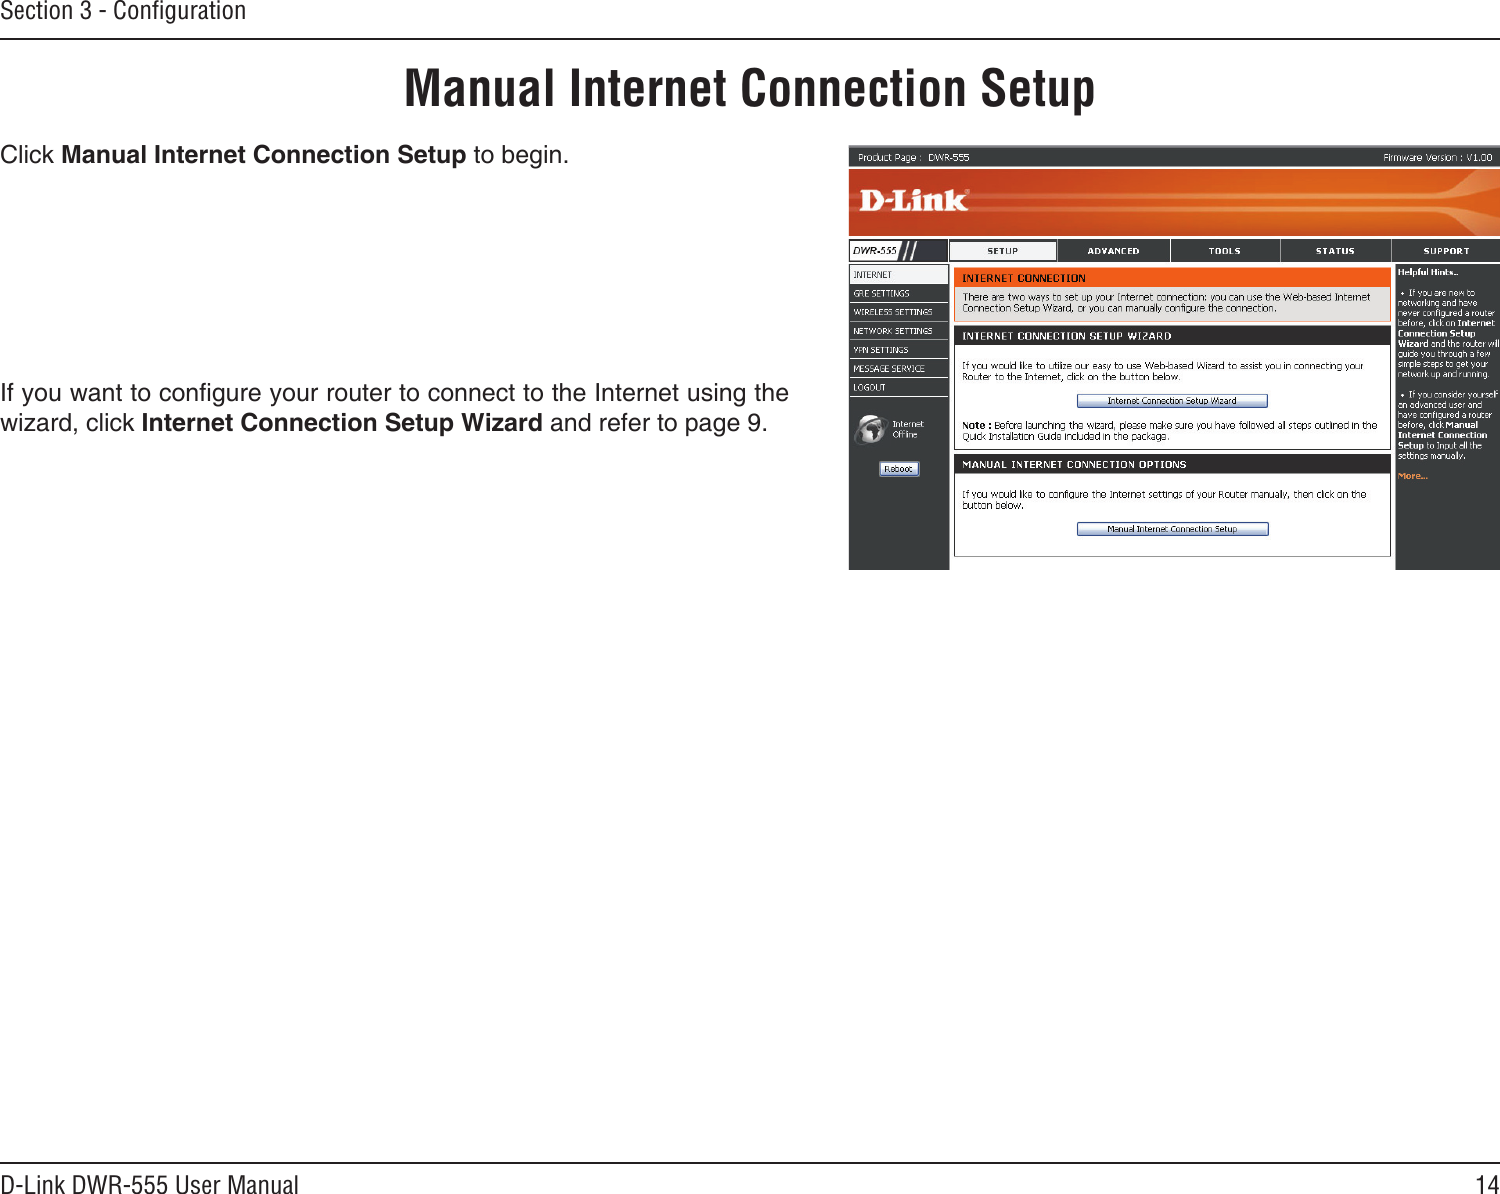 14D-Link DWR-555 User ManualSection 3 - ConﬁgurationManual Internet Connection SetupClick Manual Internet Connection Setup to begin.If you want to congure your router to connect to the Internet using the wizard, click Internet Connection Setup Wizard and refer to page 9.